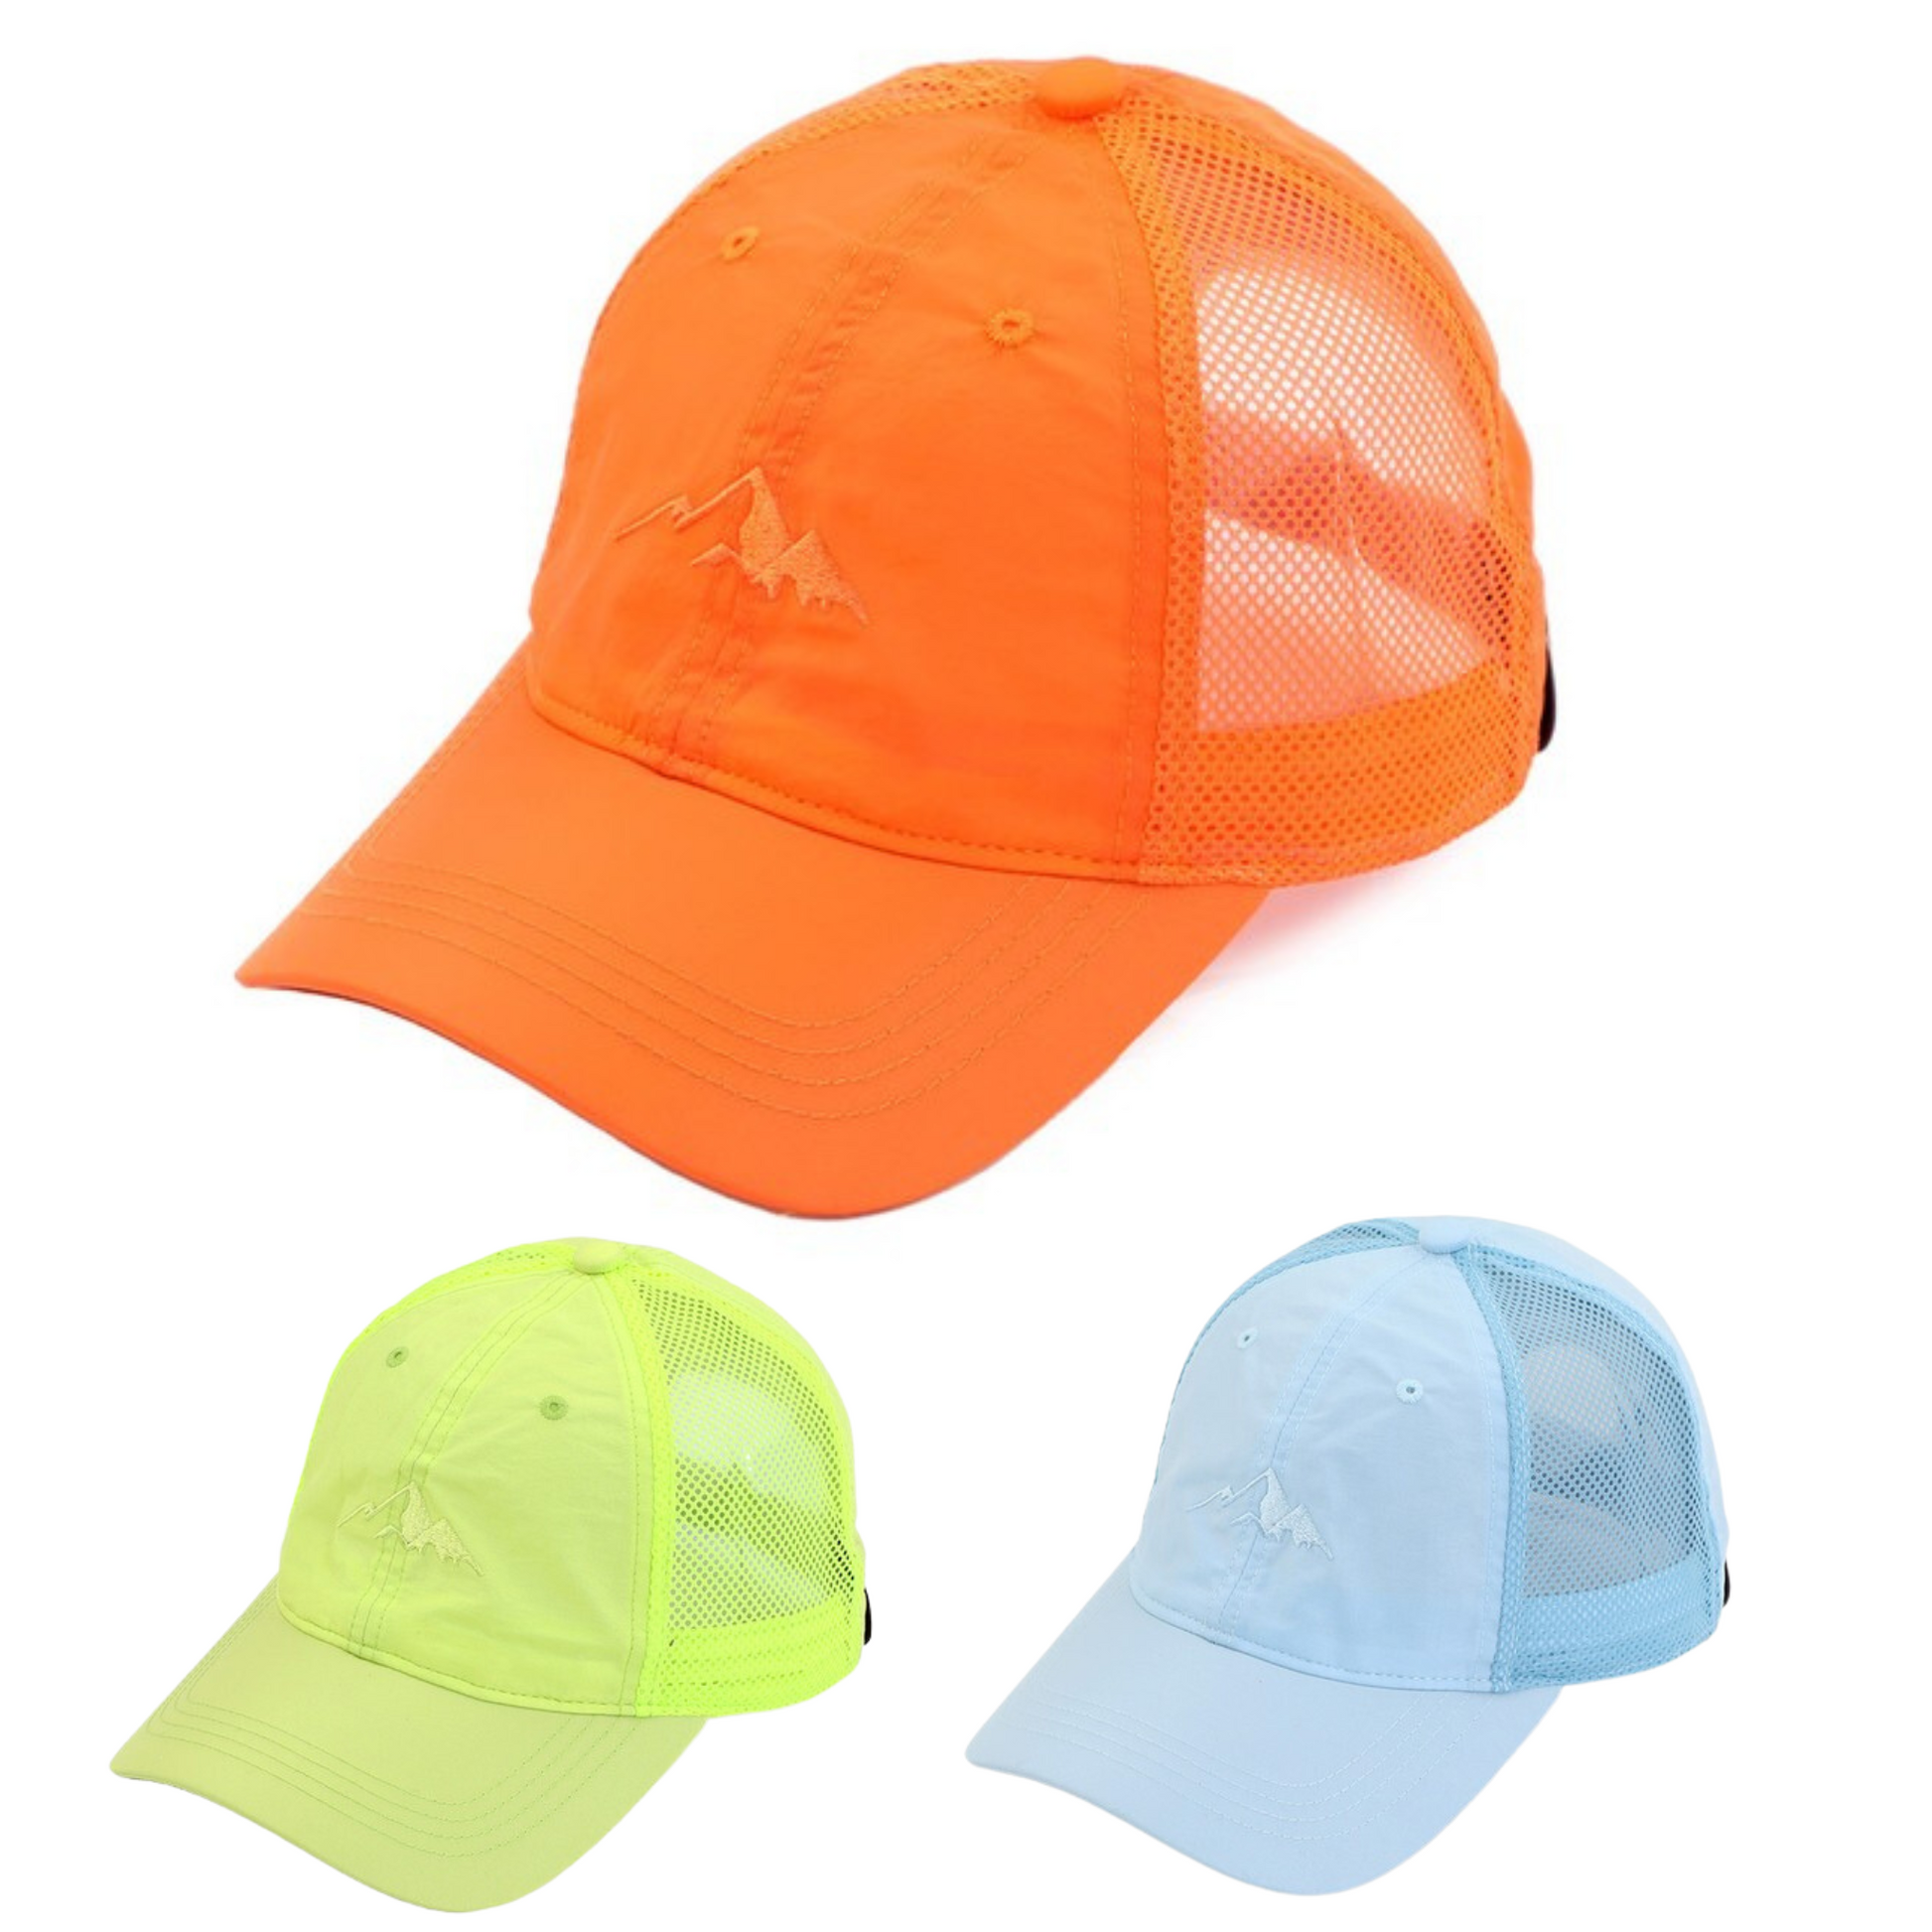 Look good and feel great with our Weightless Windbreaker Baseball Cap! This stylish accessory comes in 3 fun colors – light blue, lime green, and orange – and provides adjustable comfort with its adjustable back. This cap is the perfect choice for anyone looking for lightweight protection from the elements.